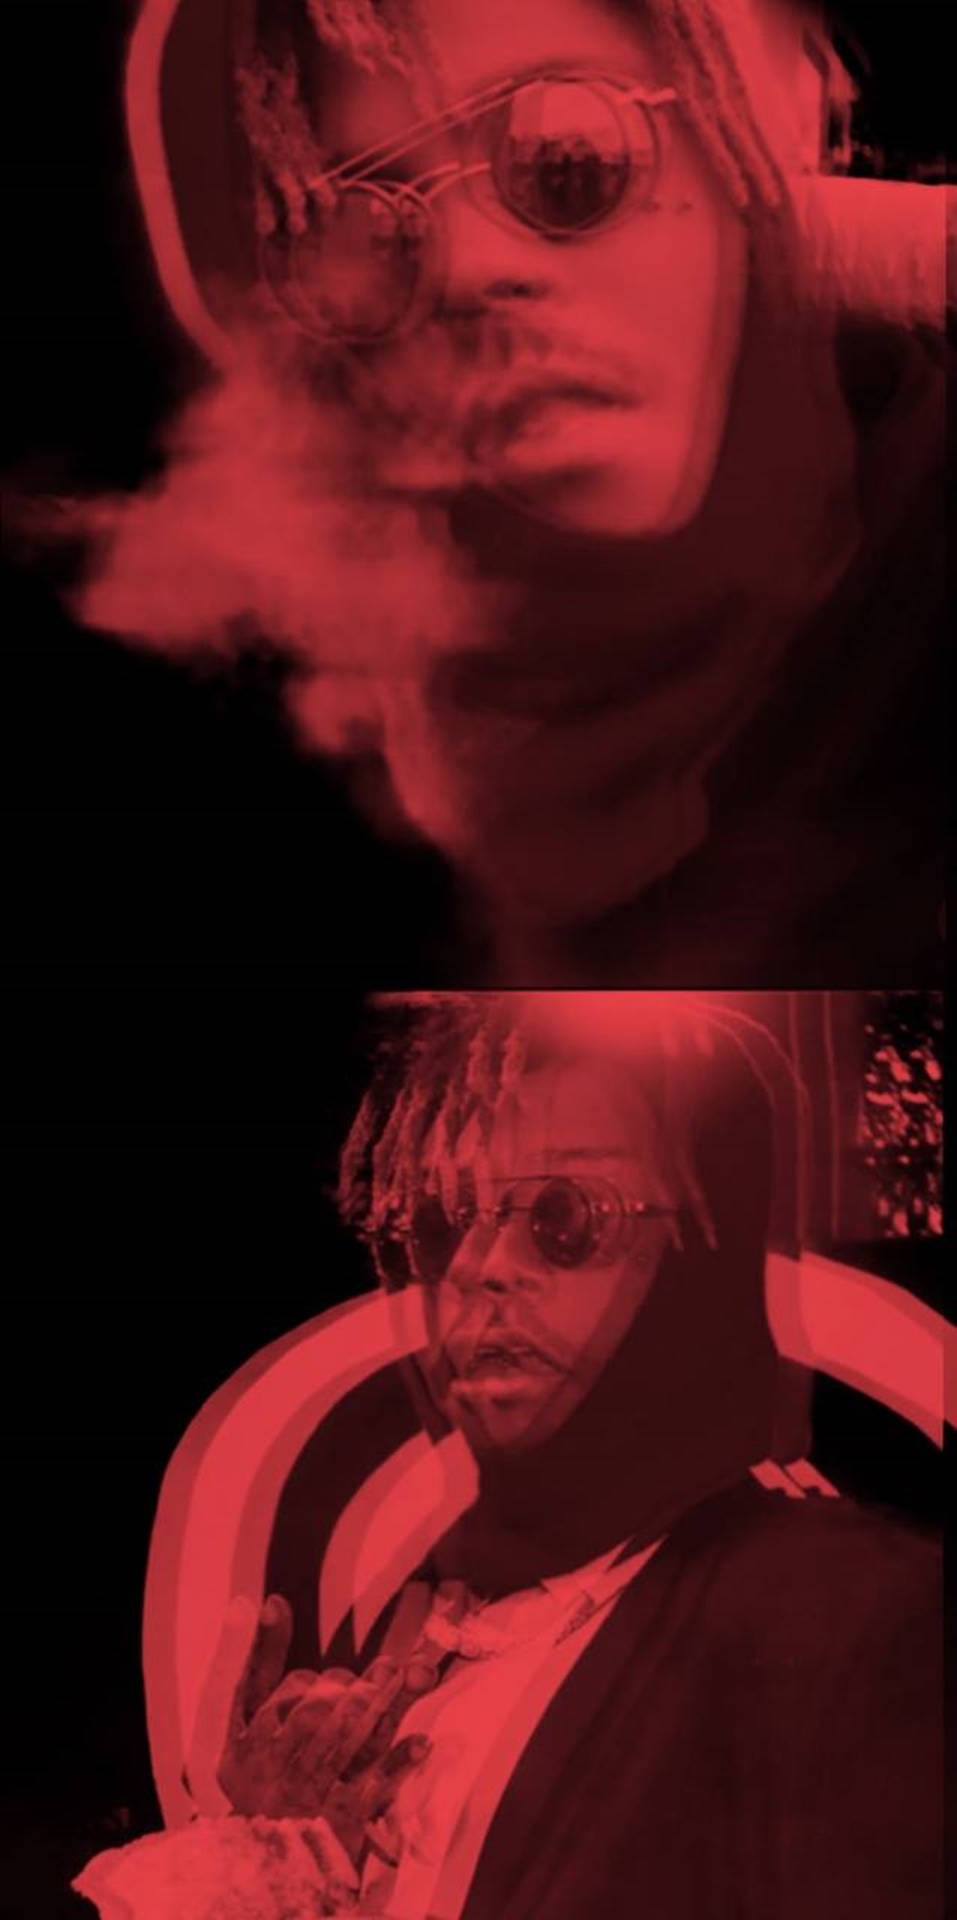 Music Aesthetic with Juice Wrld Wallpaper